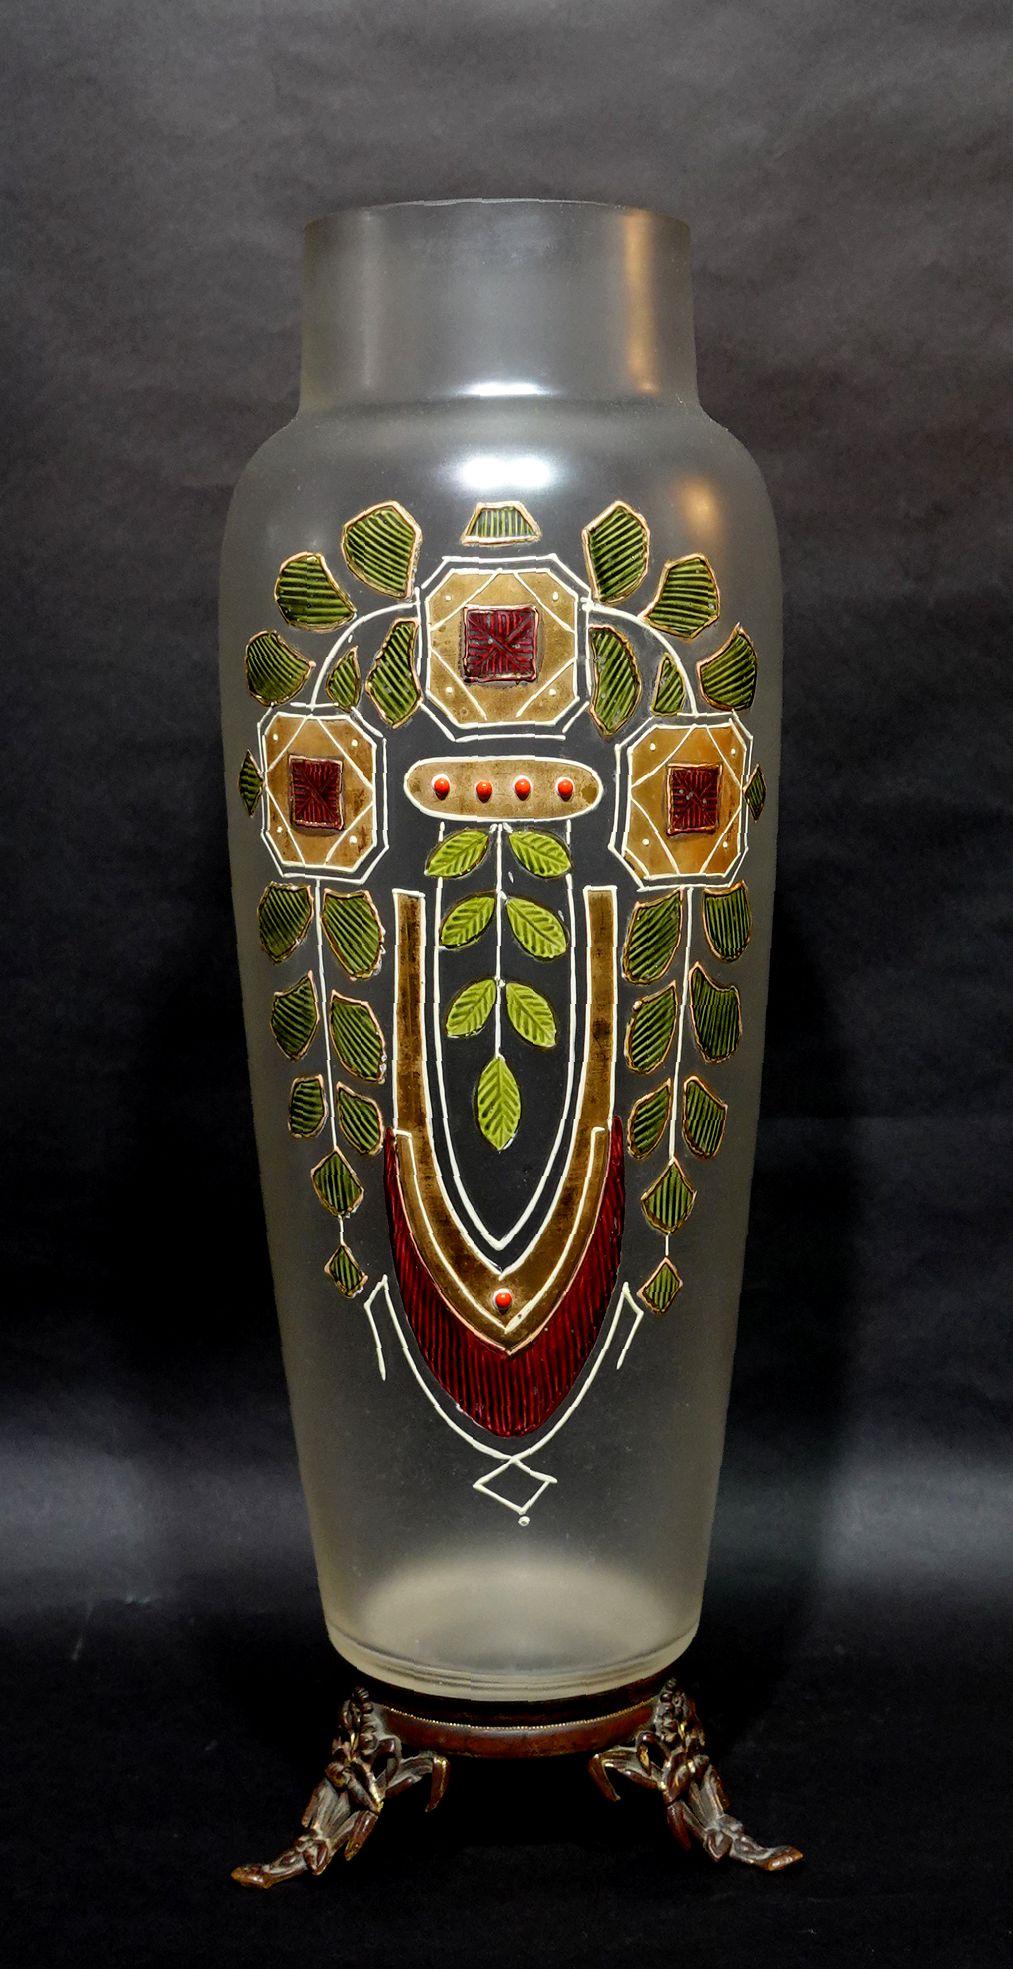 A Large Glass vase of Art Nouveau style with Enameled and Gilt Art Glass Vase in a frosted body formed a very elegant shape with subtle curved lines. The vase sits on a Bronze base.